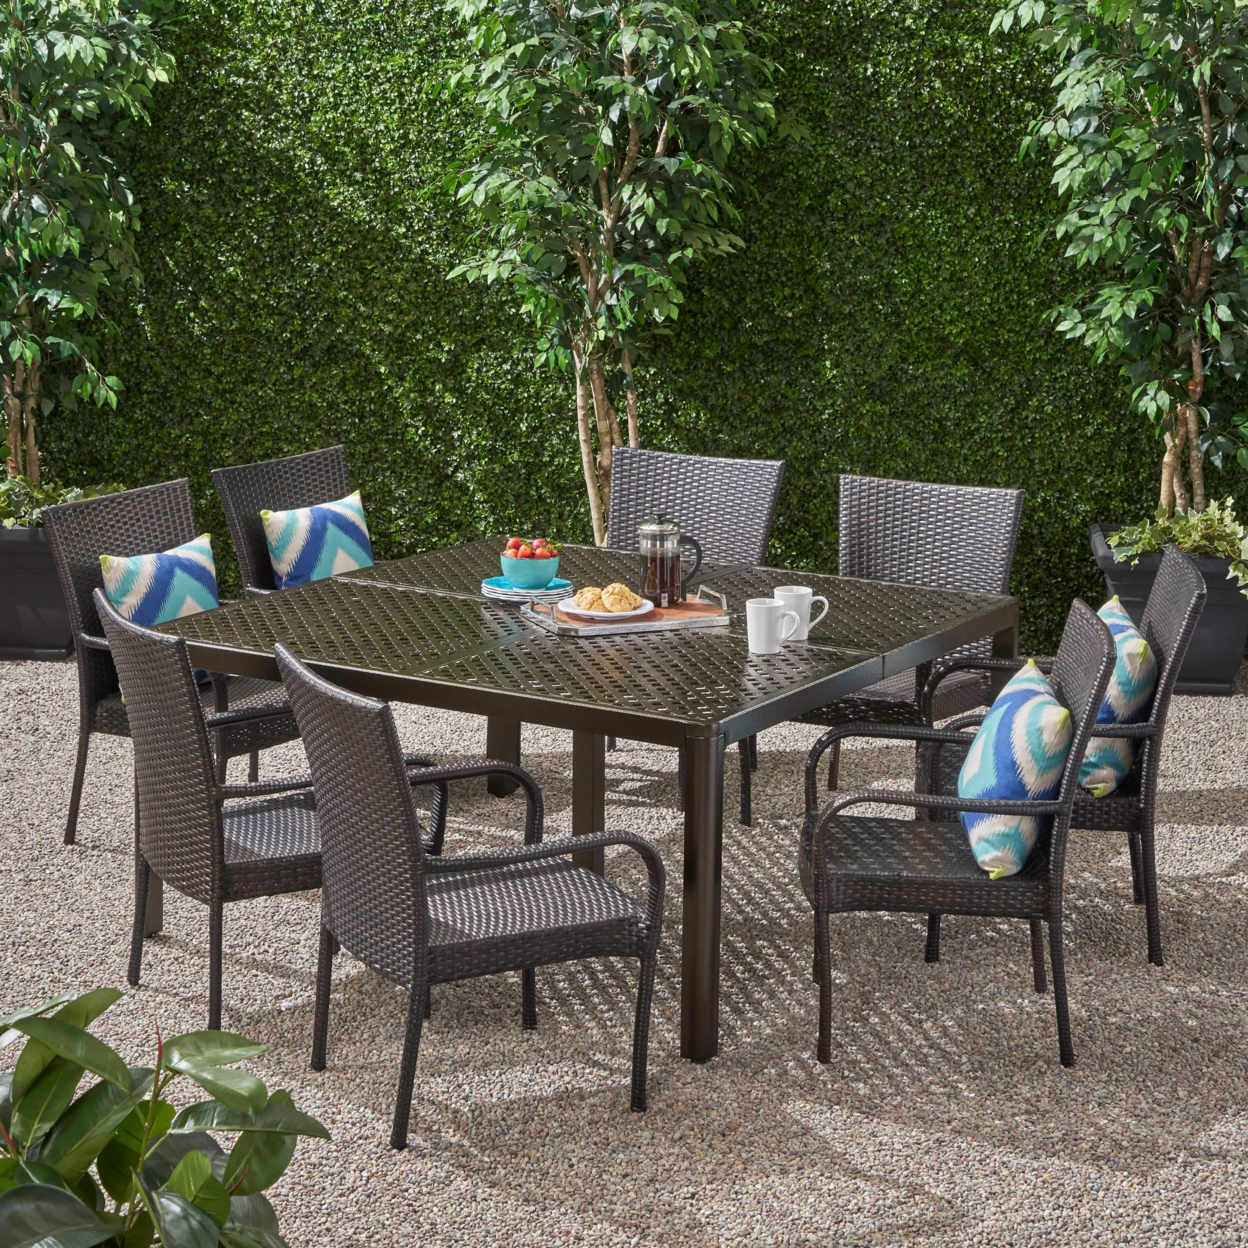 Lillian Outdoor Aluminum And Wicker 8 Seater Dining Set With Stacking Chairs - Gloss Black + Multibrown